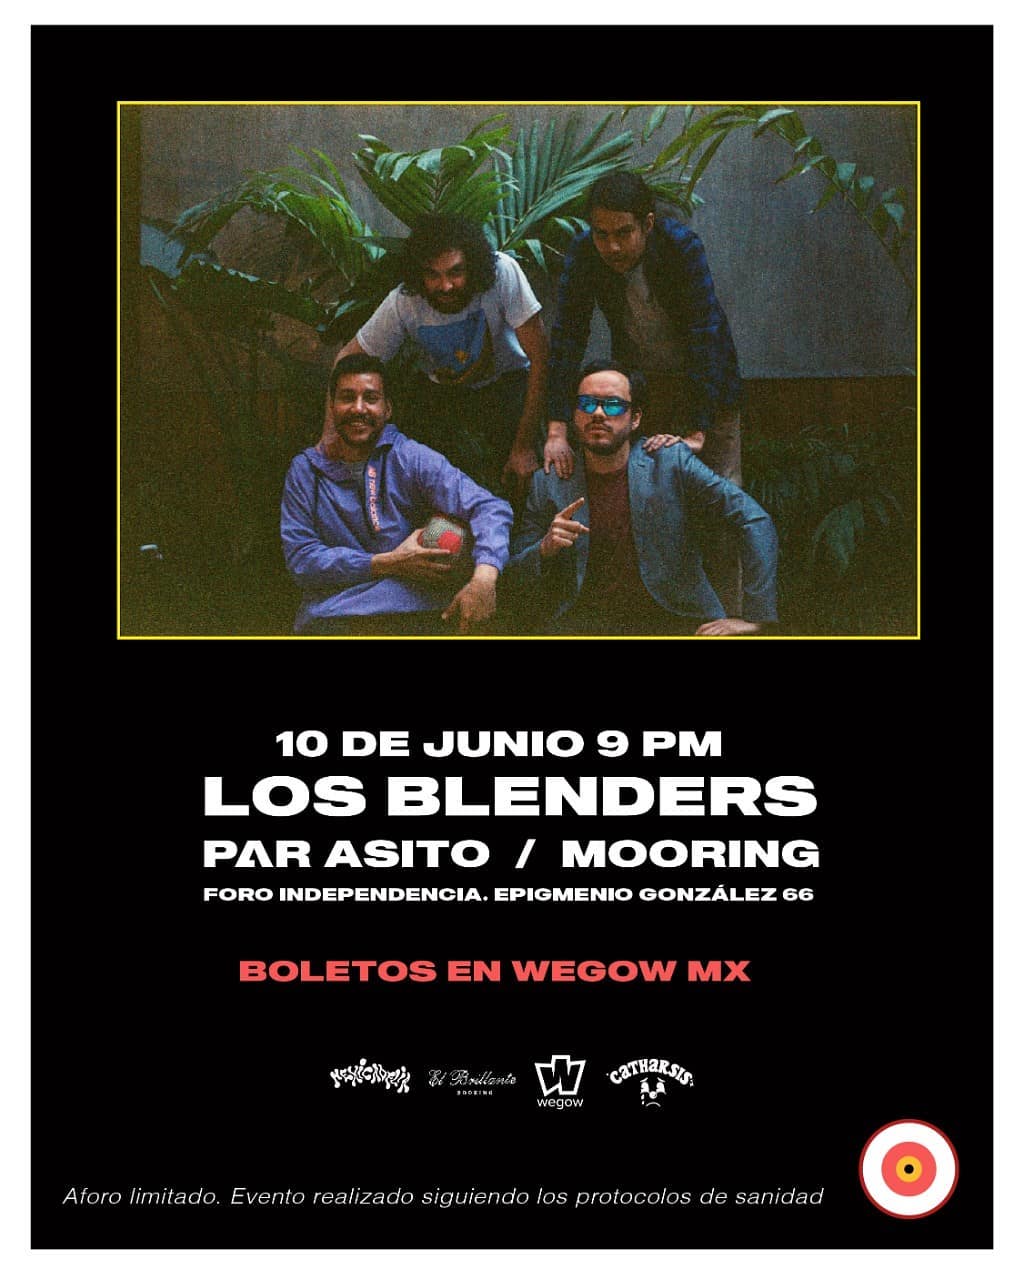 Los Blenders - Foro Independencia (Flyer 2)